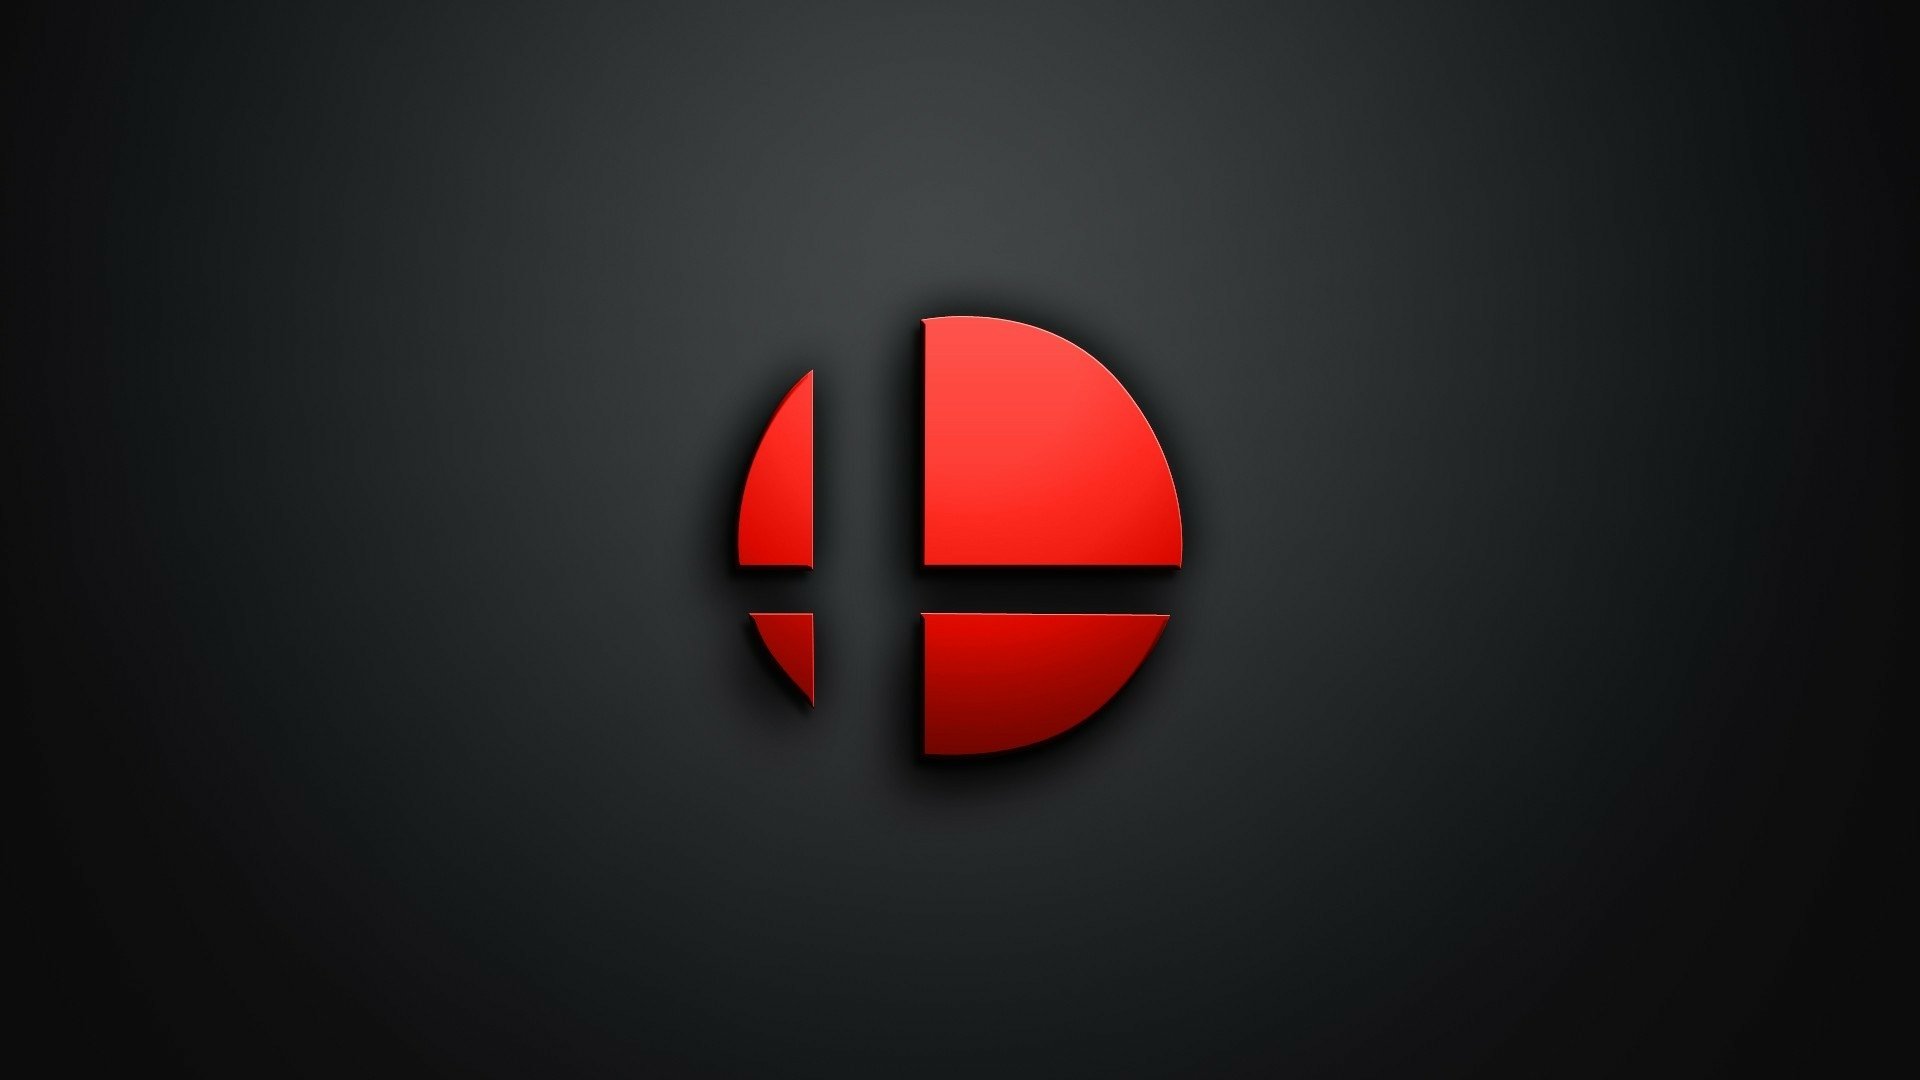 70 Super Smash Bros Hd Wallpapers Background Images